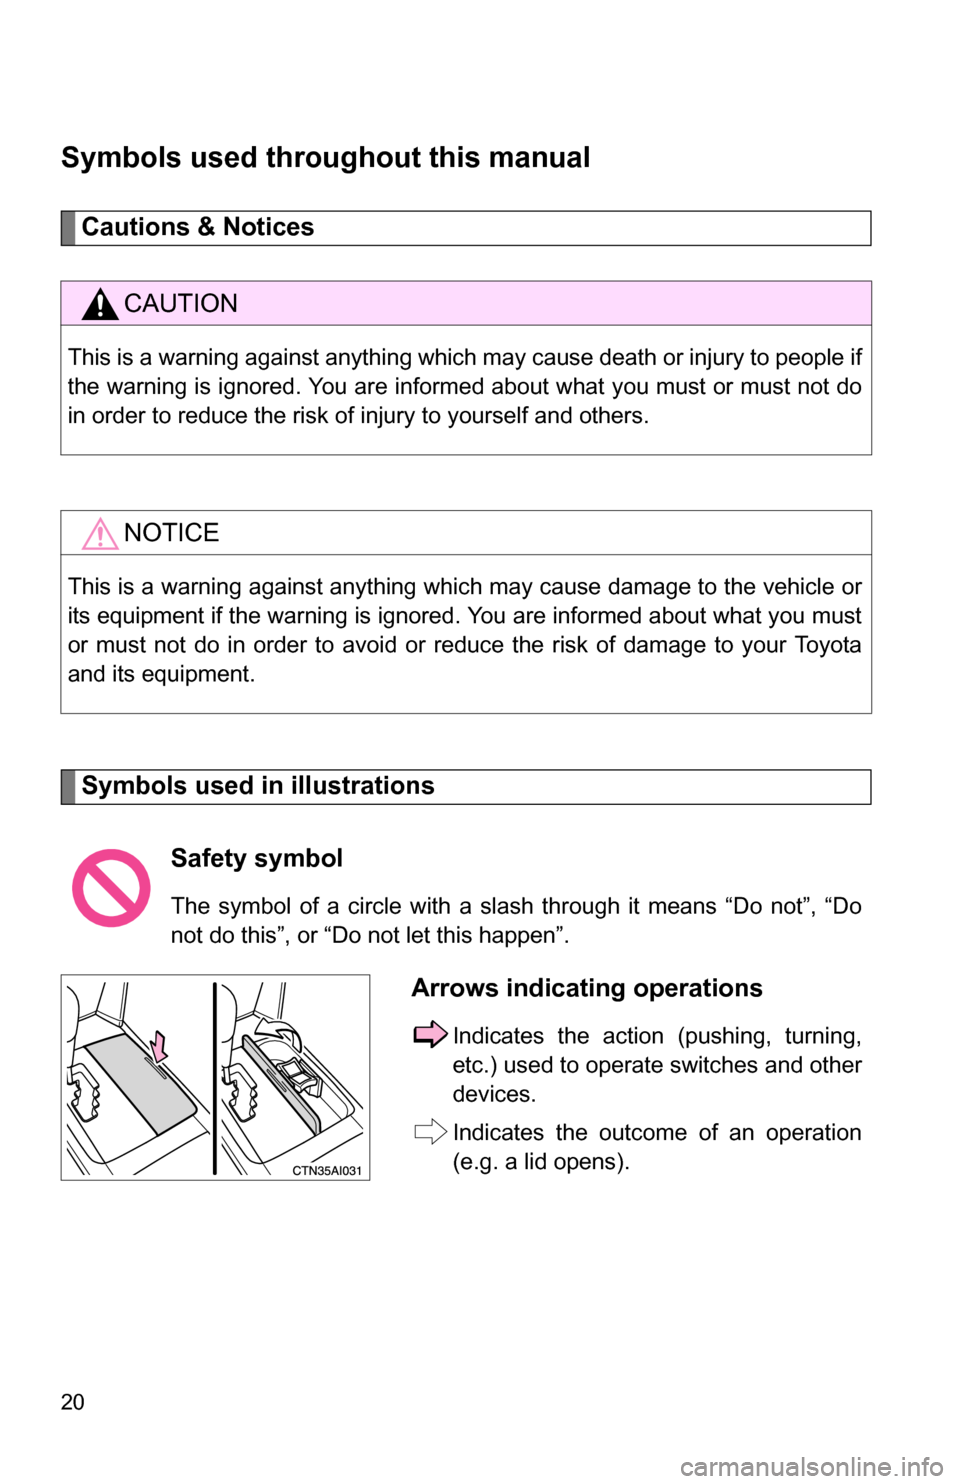 TOYOTA CAMRY HYBRID 2010 XV40 / 8.G Owners Manual 20
Symbols used throughout this manual
Cautions & Notices 
Symbols used in illustrations
CAUTION
This is a warning against anything which may cause death or injury to people if
the warning is ignored.